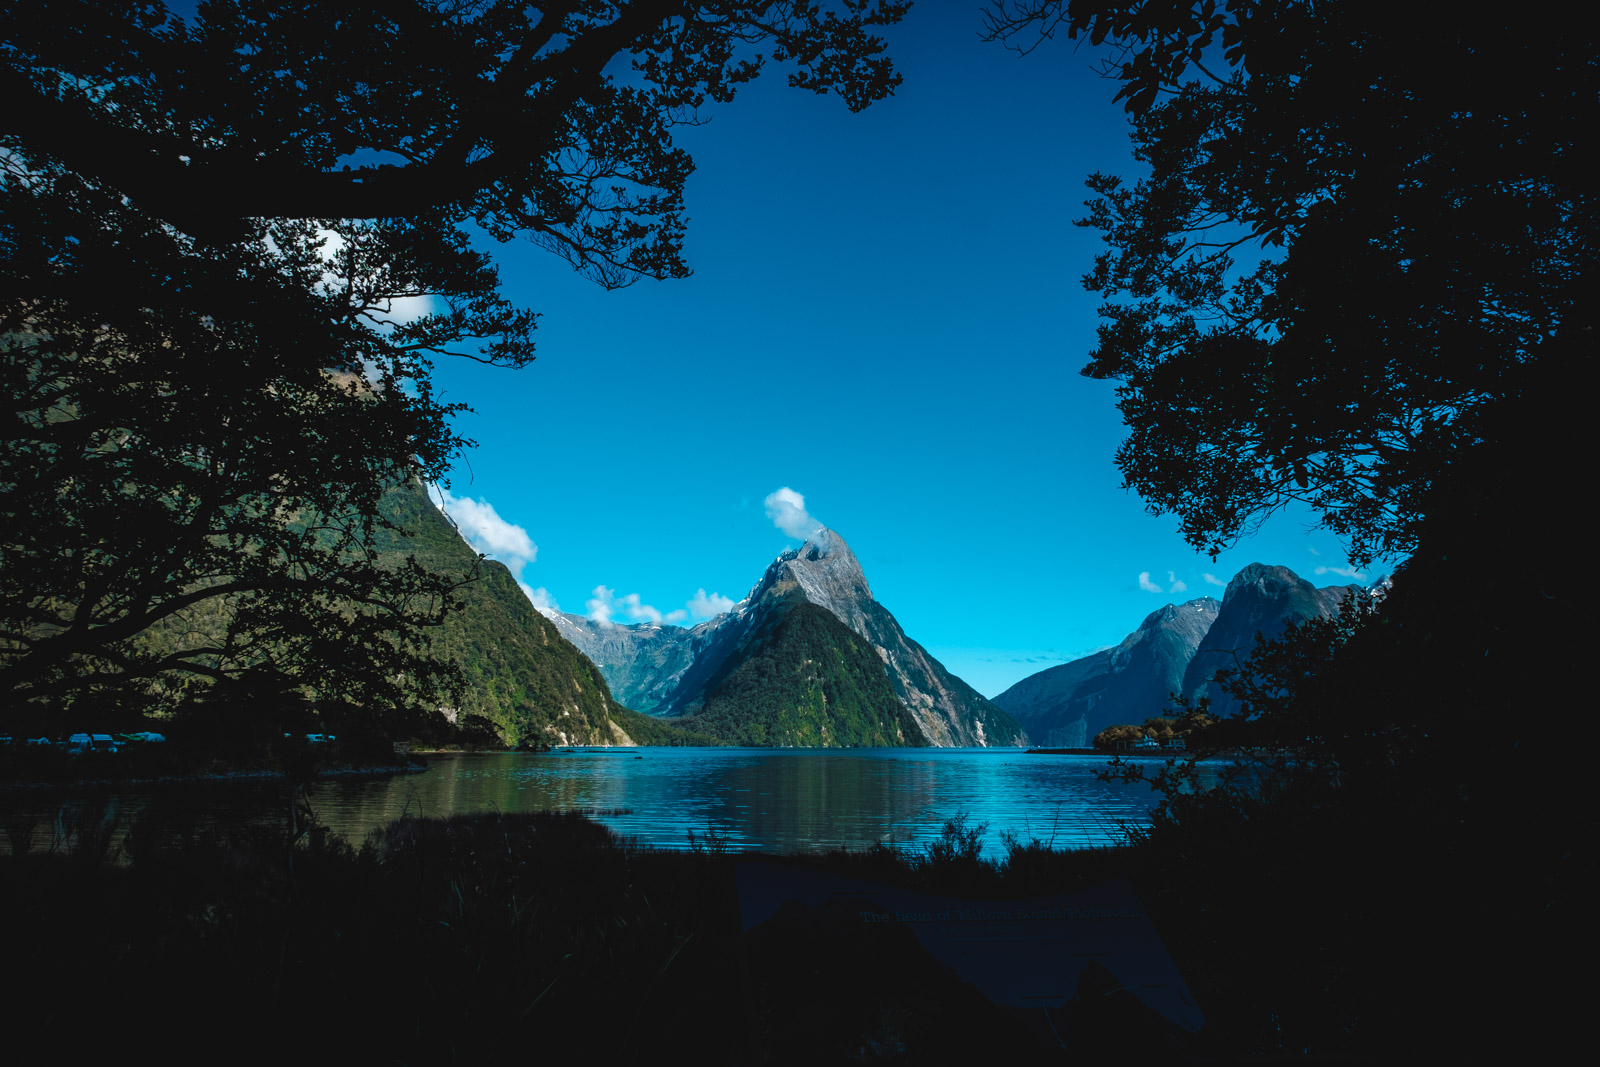 Feast Your Eyes on Milford Sound